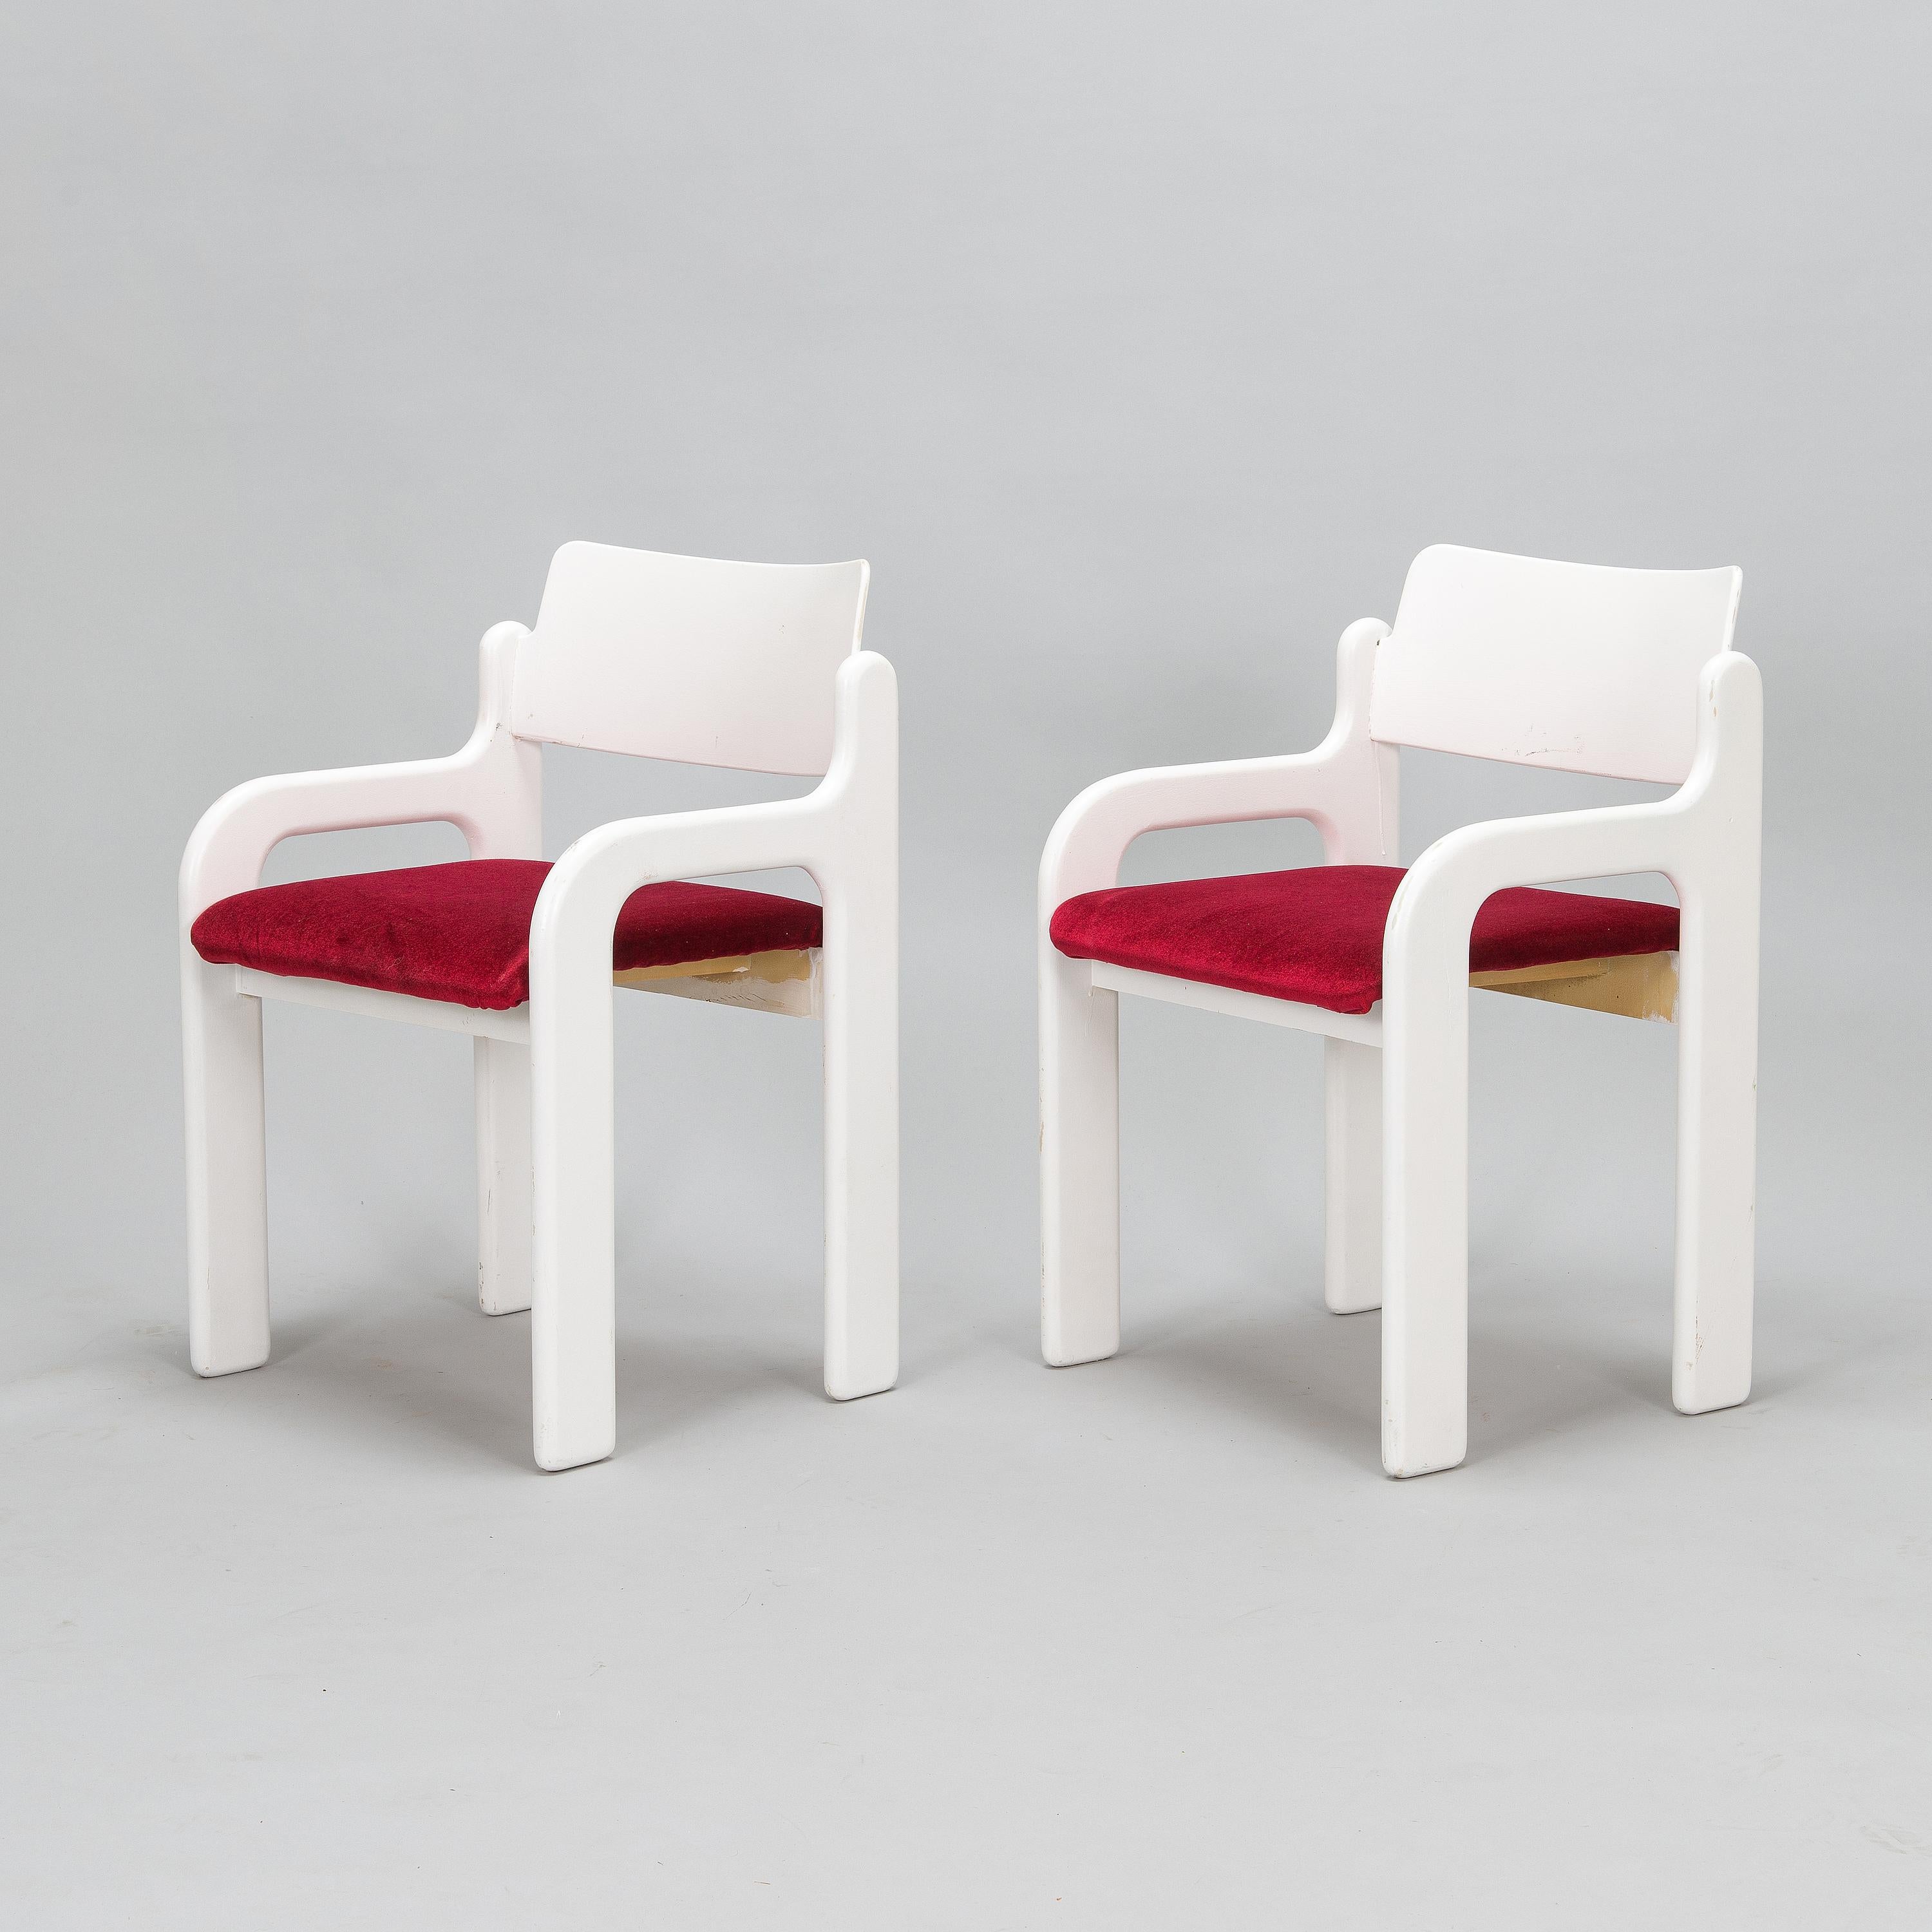 Eero Aarnio
(Finland, Born 1932)
Eero Aarnio, a set of four 1970s 'Flamingo' chairs for Asko Finland.
White lacquered frames and red textile upholstery. Marked with manufacturer's label. Height to seat 44 cm. Width 50 cm, height 73 cm.
Good